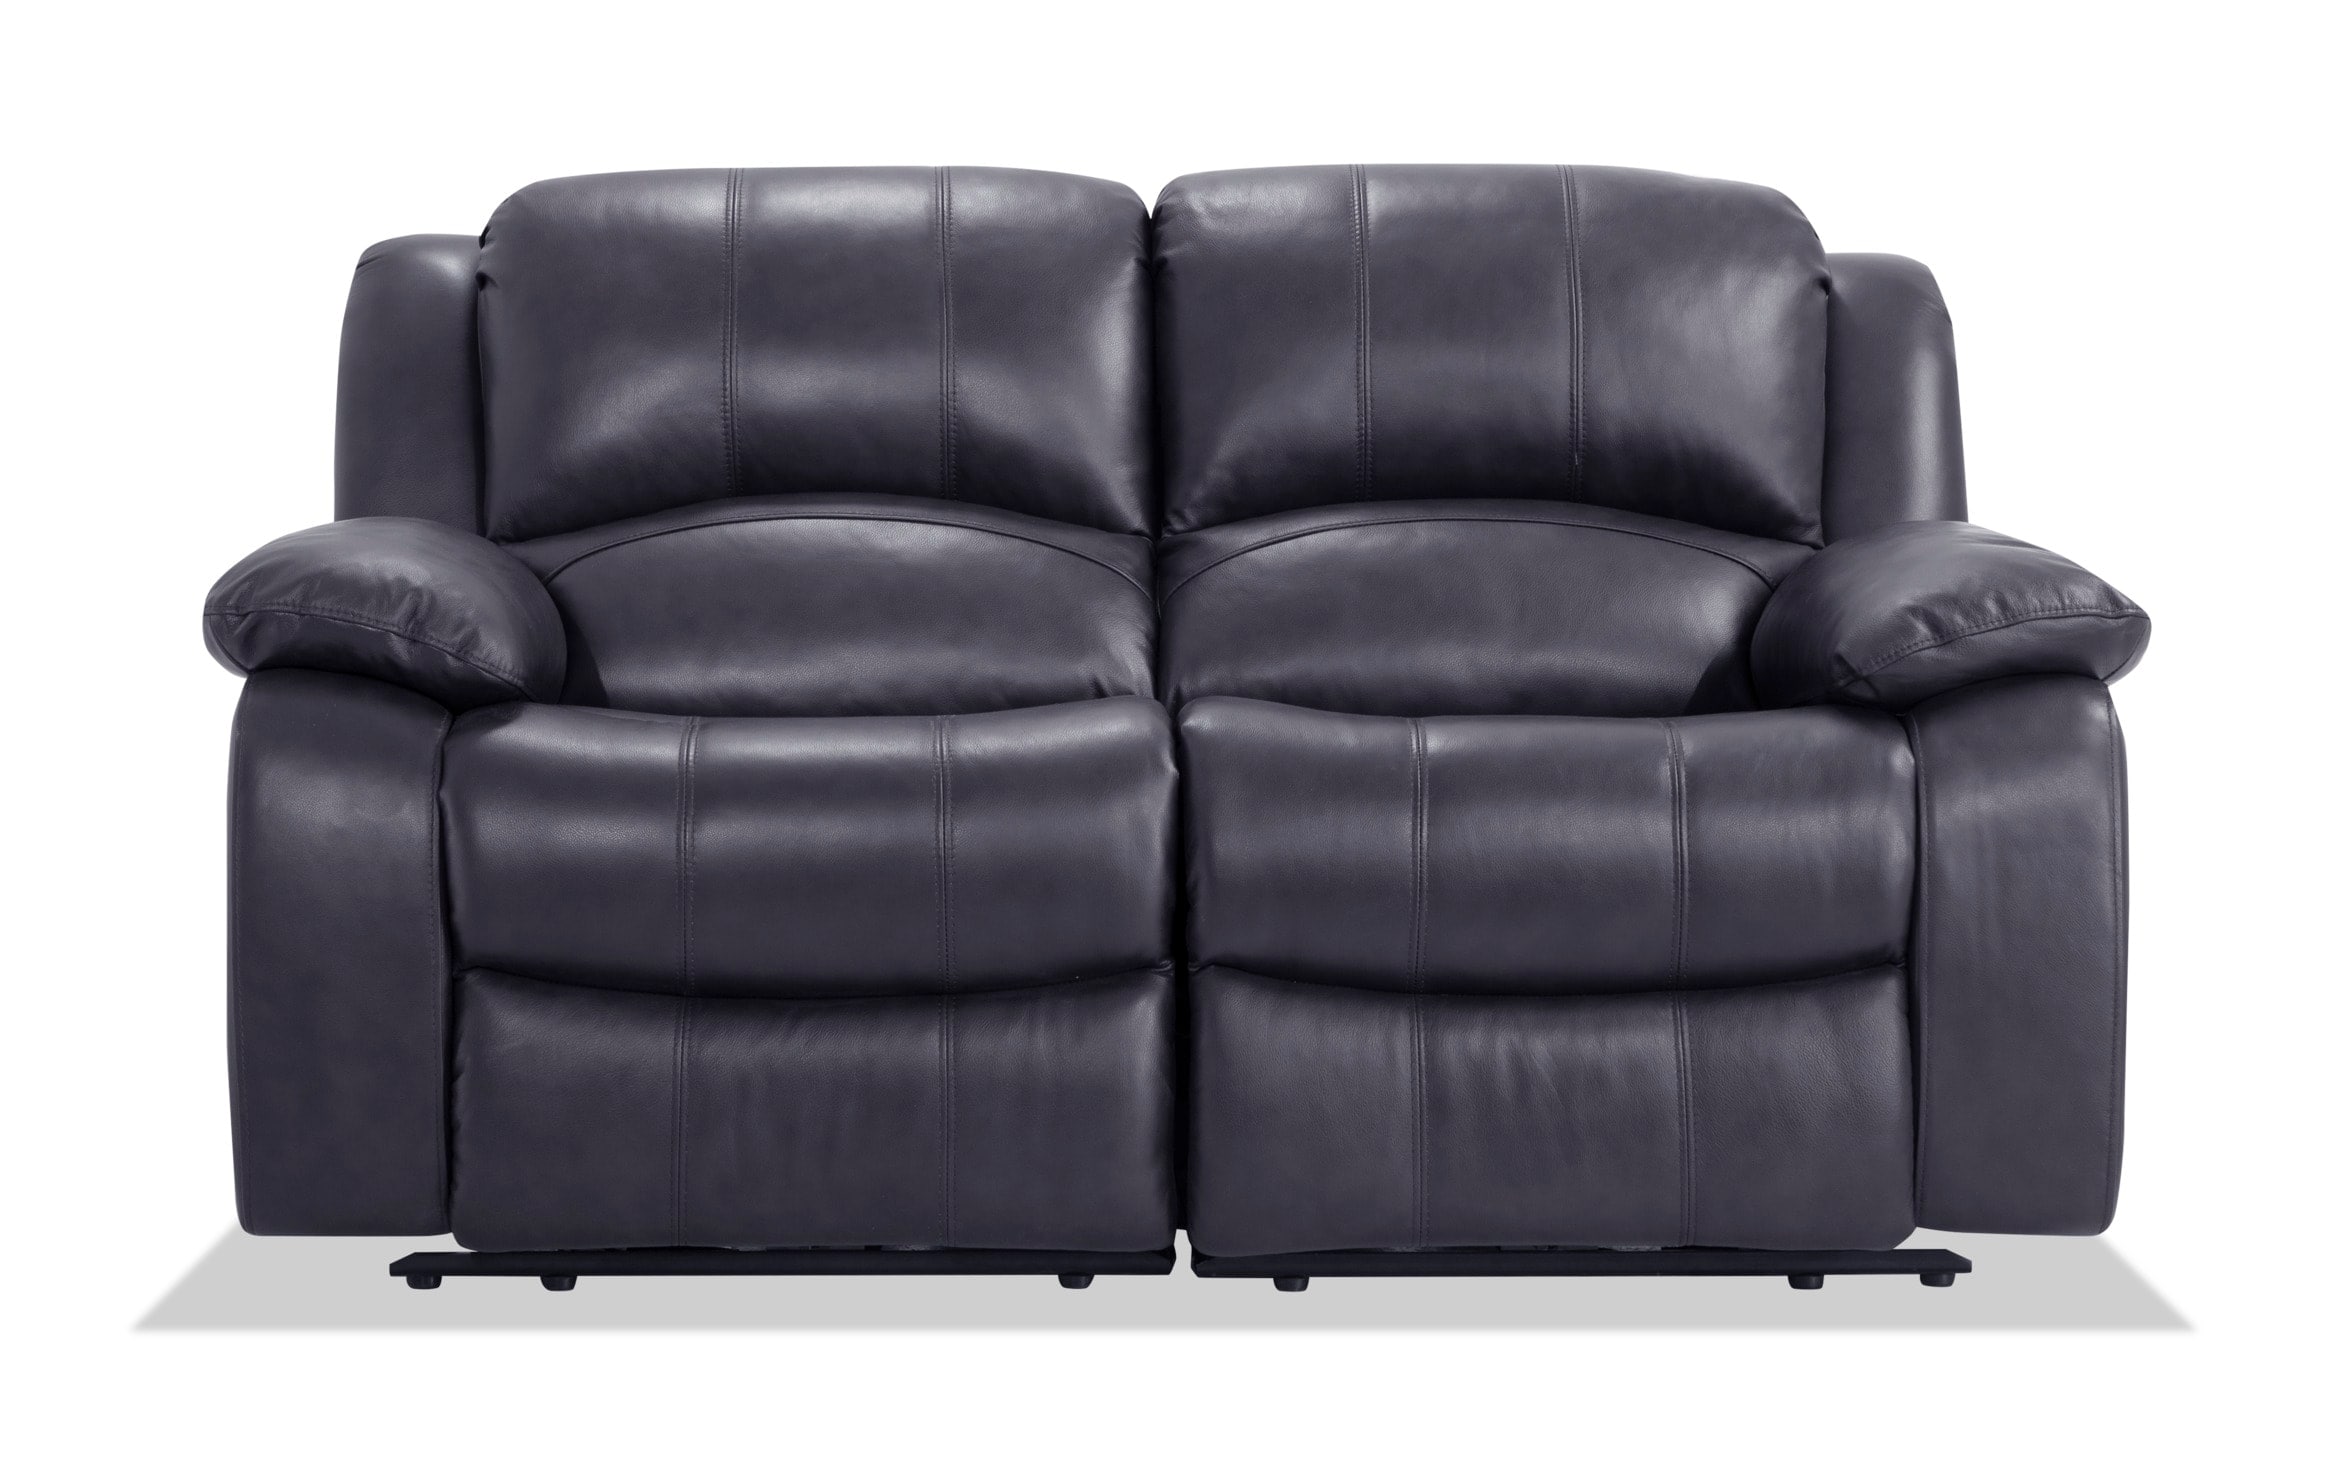 Olympus Gray Leather Power Reclining, Best Leather Power Reclining Sofa 2020